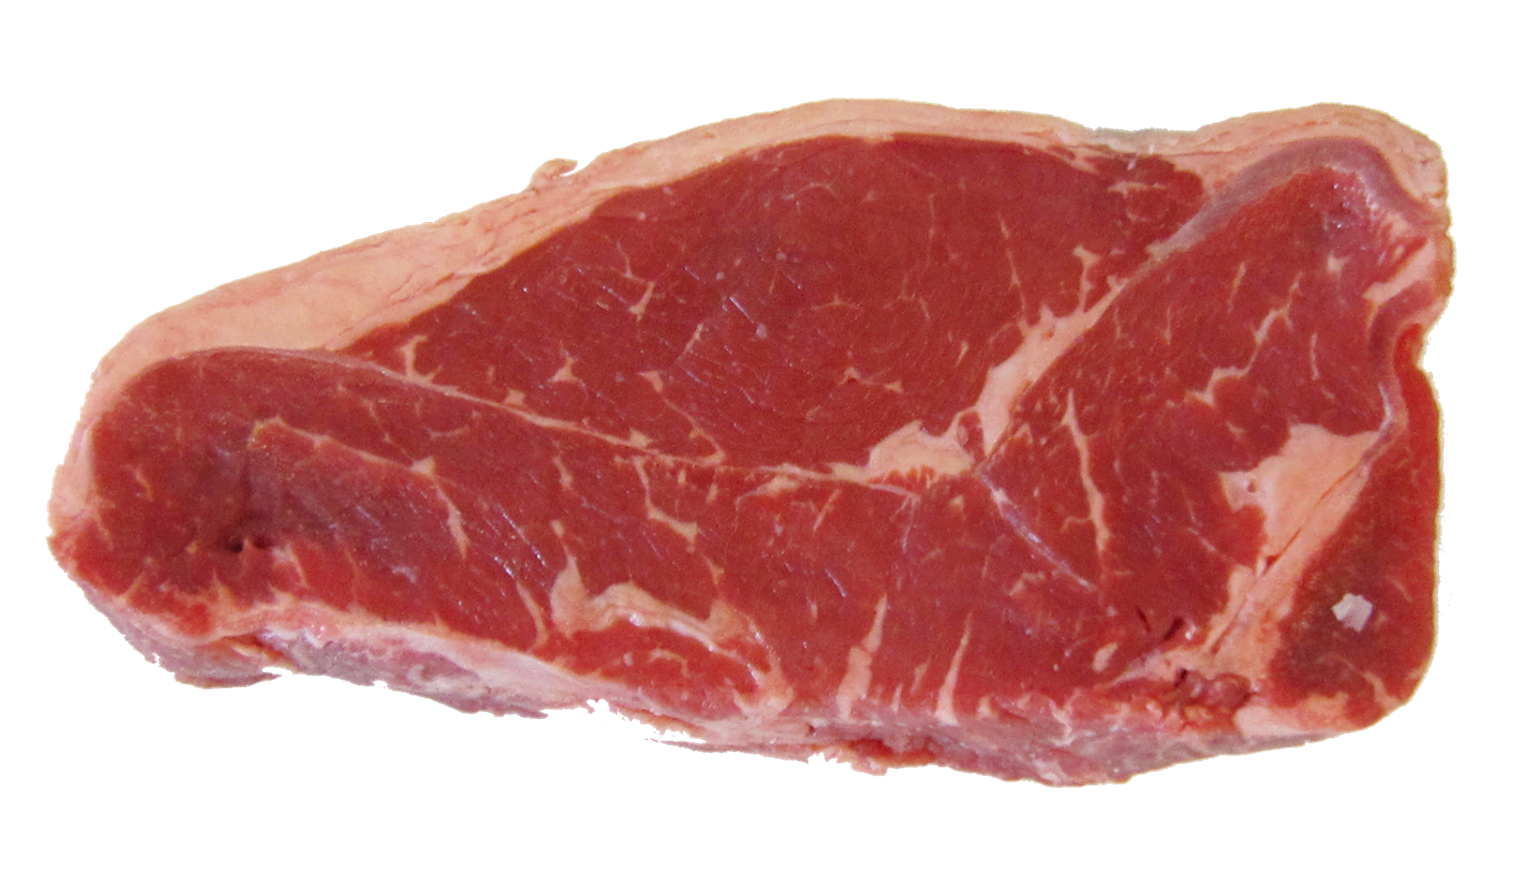 Fresh sliced raw meat picture